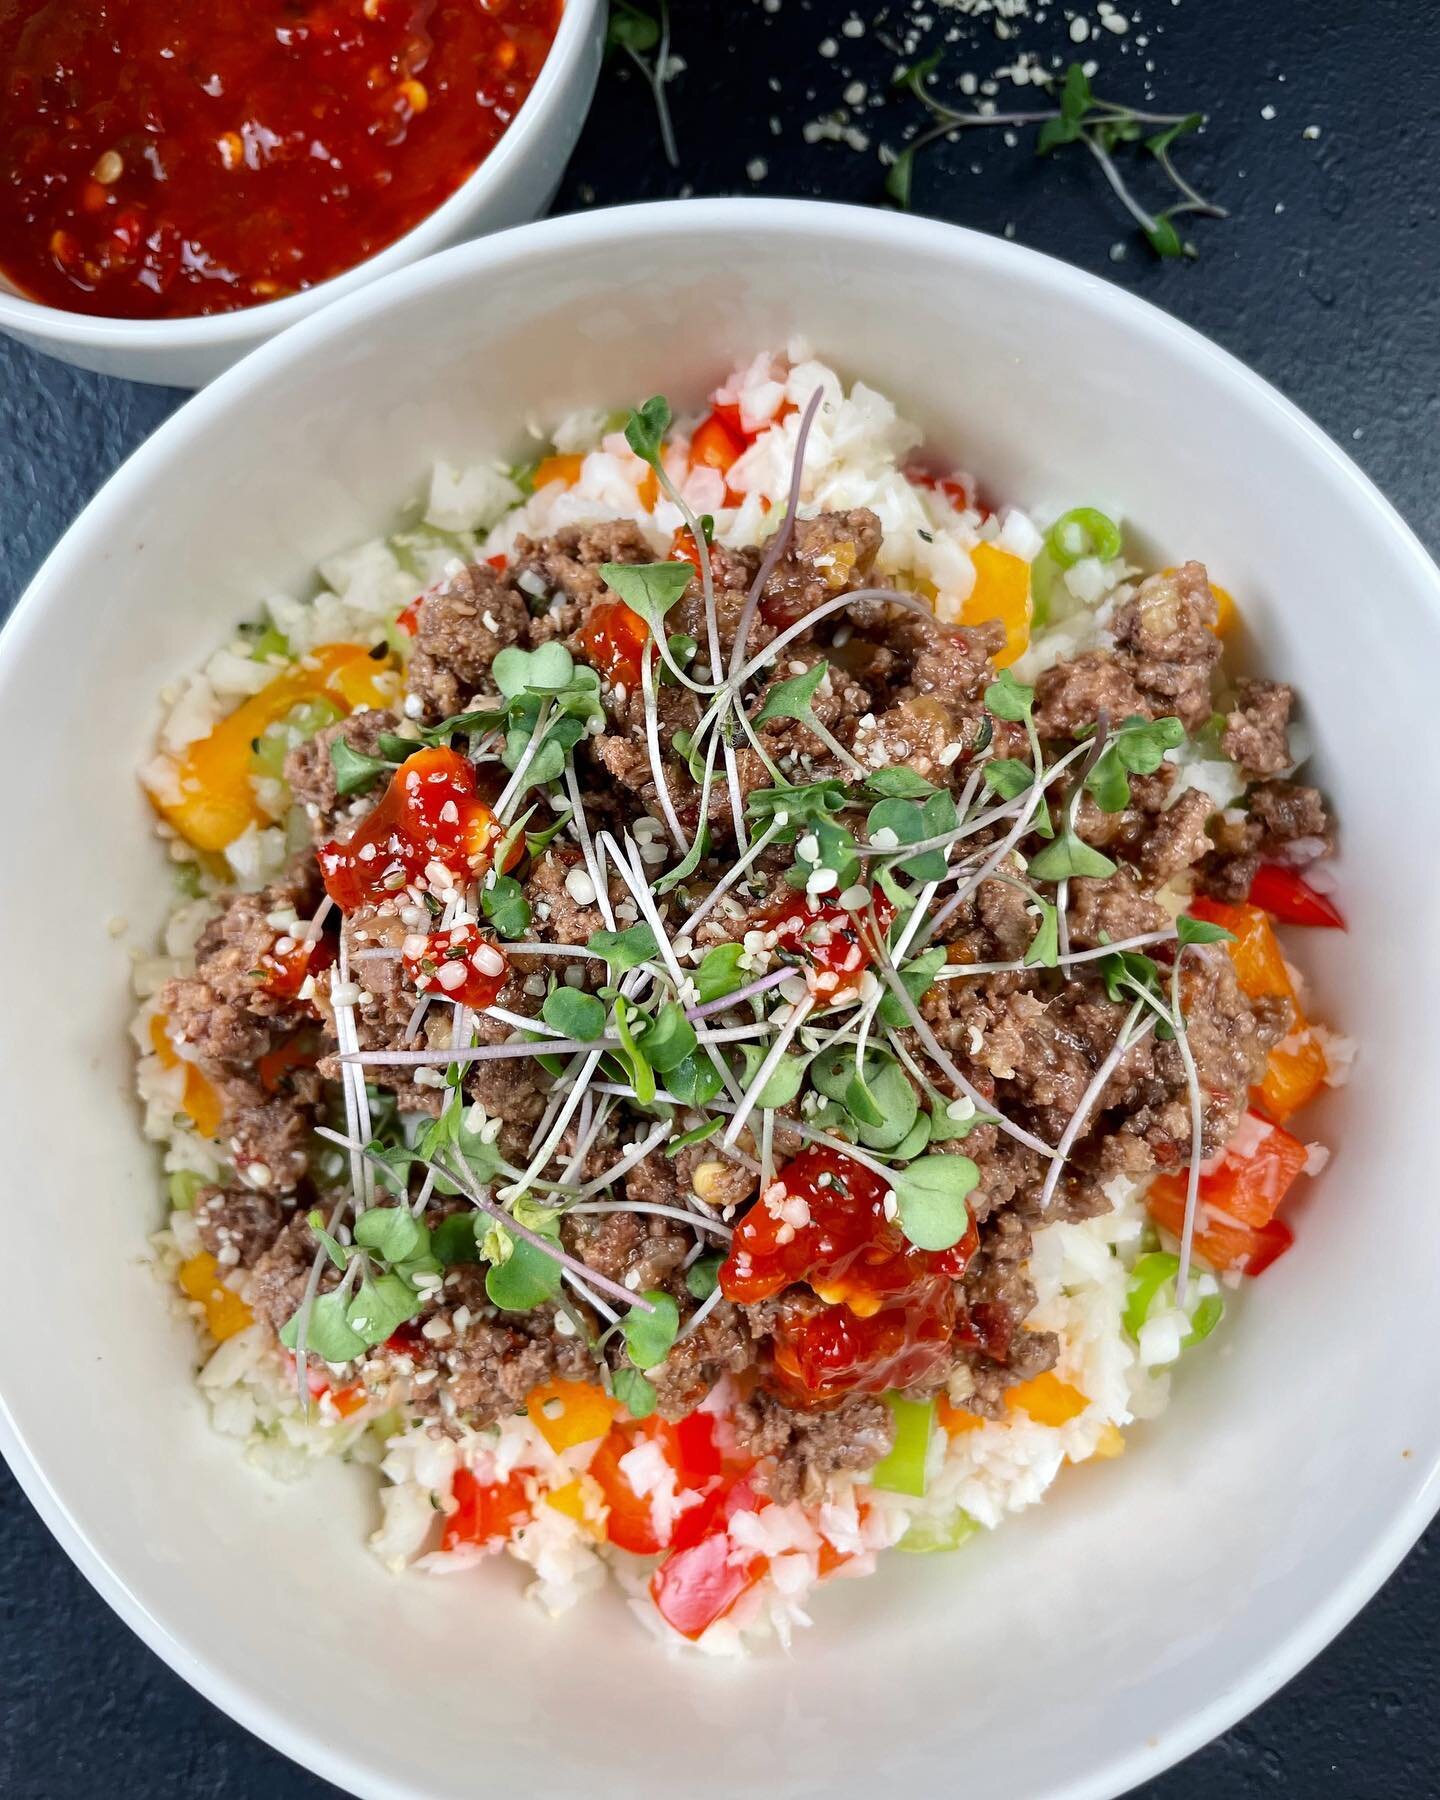 KOREAN GROUND BEEF BOWL with Hearts of Palm Rice
⠀⠀⠀⠀⠀⠀⠀⠀⠀
(df, grain-free/gf, nf, paleo, keto &amp; RSF)
⠀⠀⠀⠀⠀⠀⠀⠀⠀
⭐️ TIP: SAVE THIS POST for an EASY &amp; DELICIOUS FAMILY-FRIENDLY RECIPE! ⭐️
⠀⠀⠀⠀⠀⠀⠀⠀⠀
My Korean Ground Beef recipe is quick, nutriti